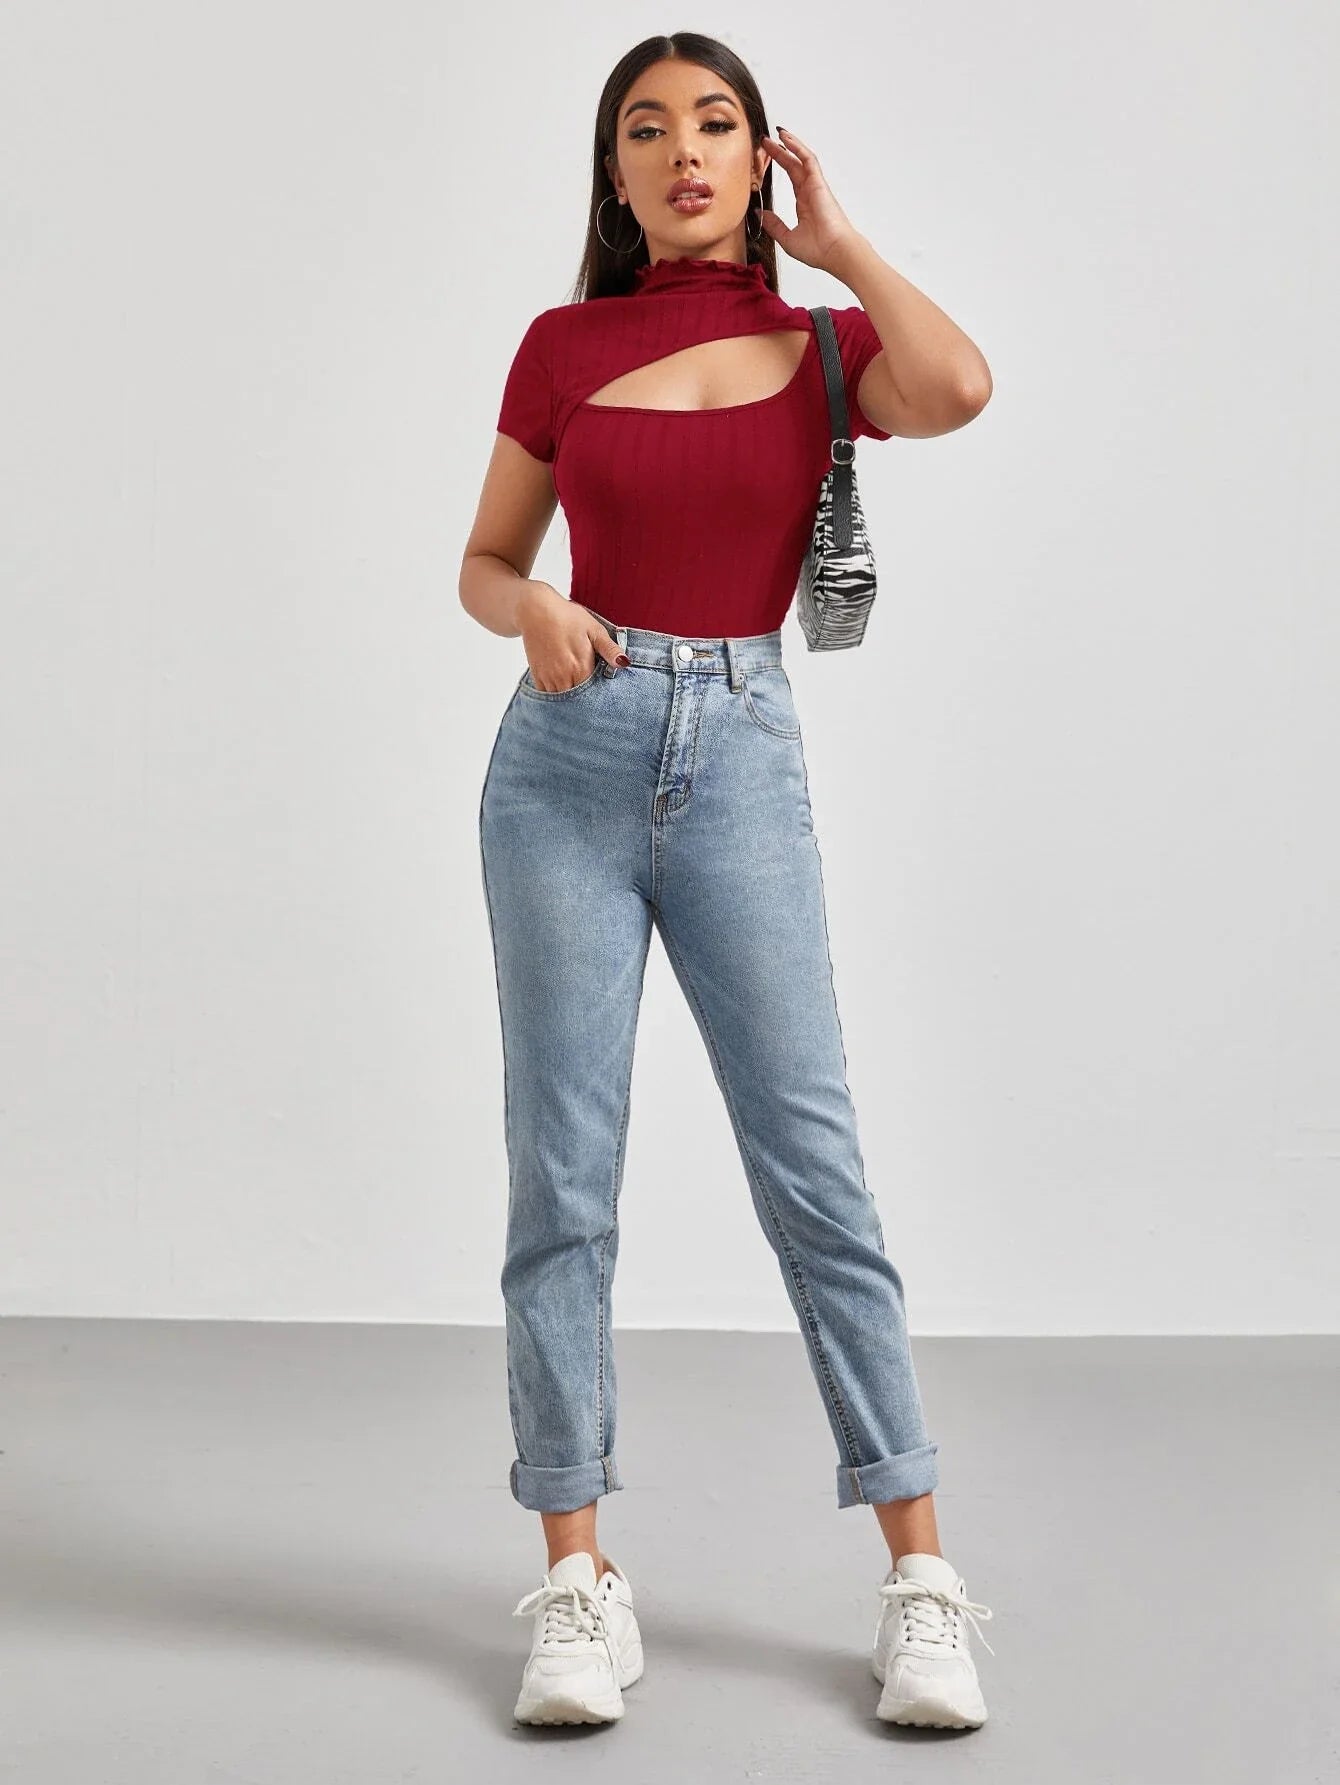 Buy Shein Unity Cutout Detail Solid Tee in Pakistan